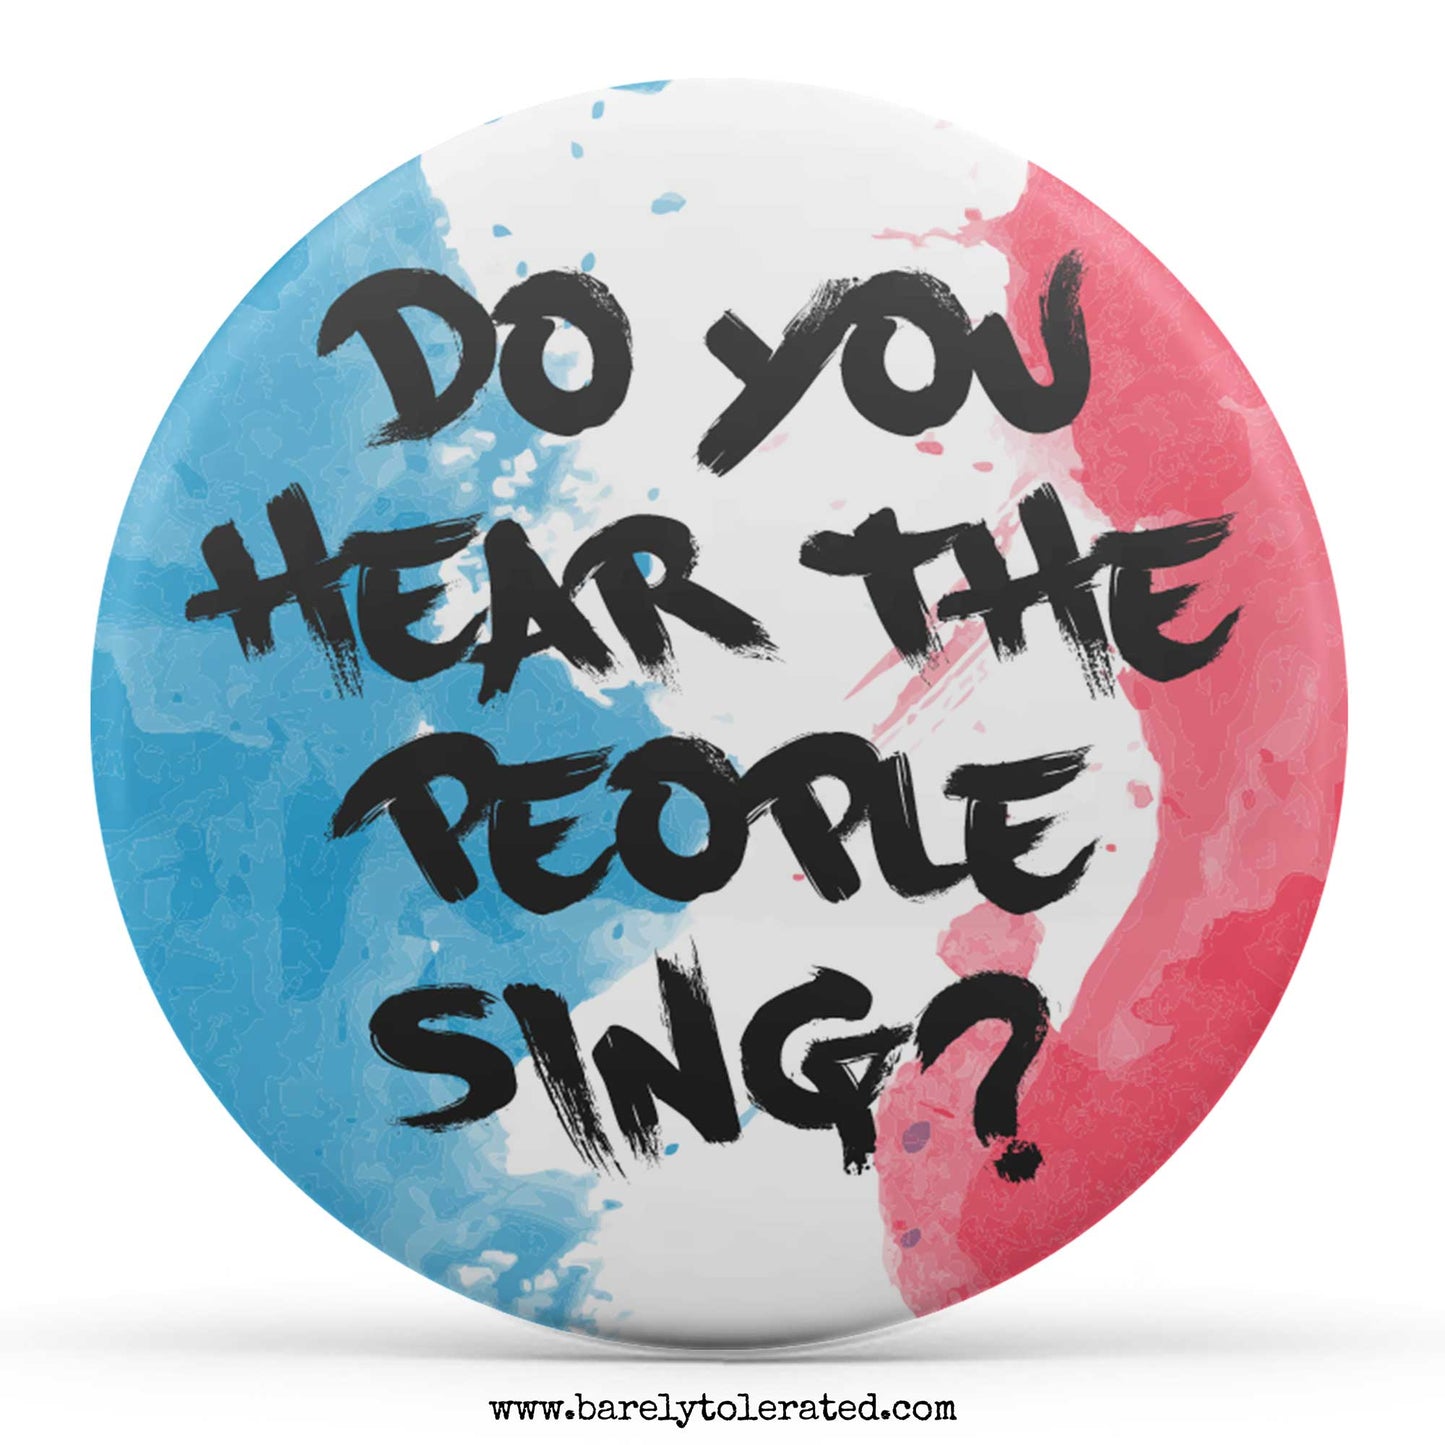 Do You Hear The People Sing